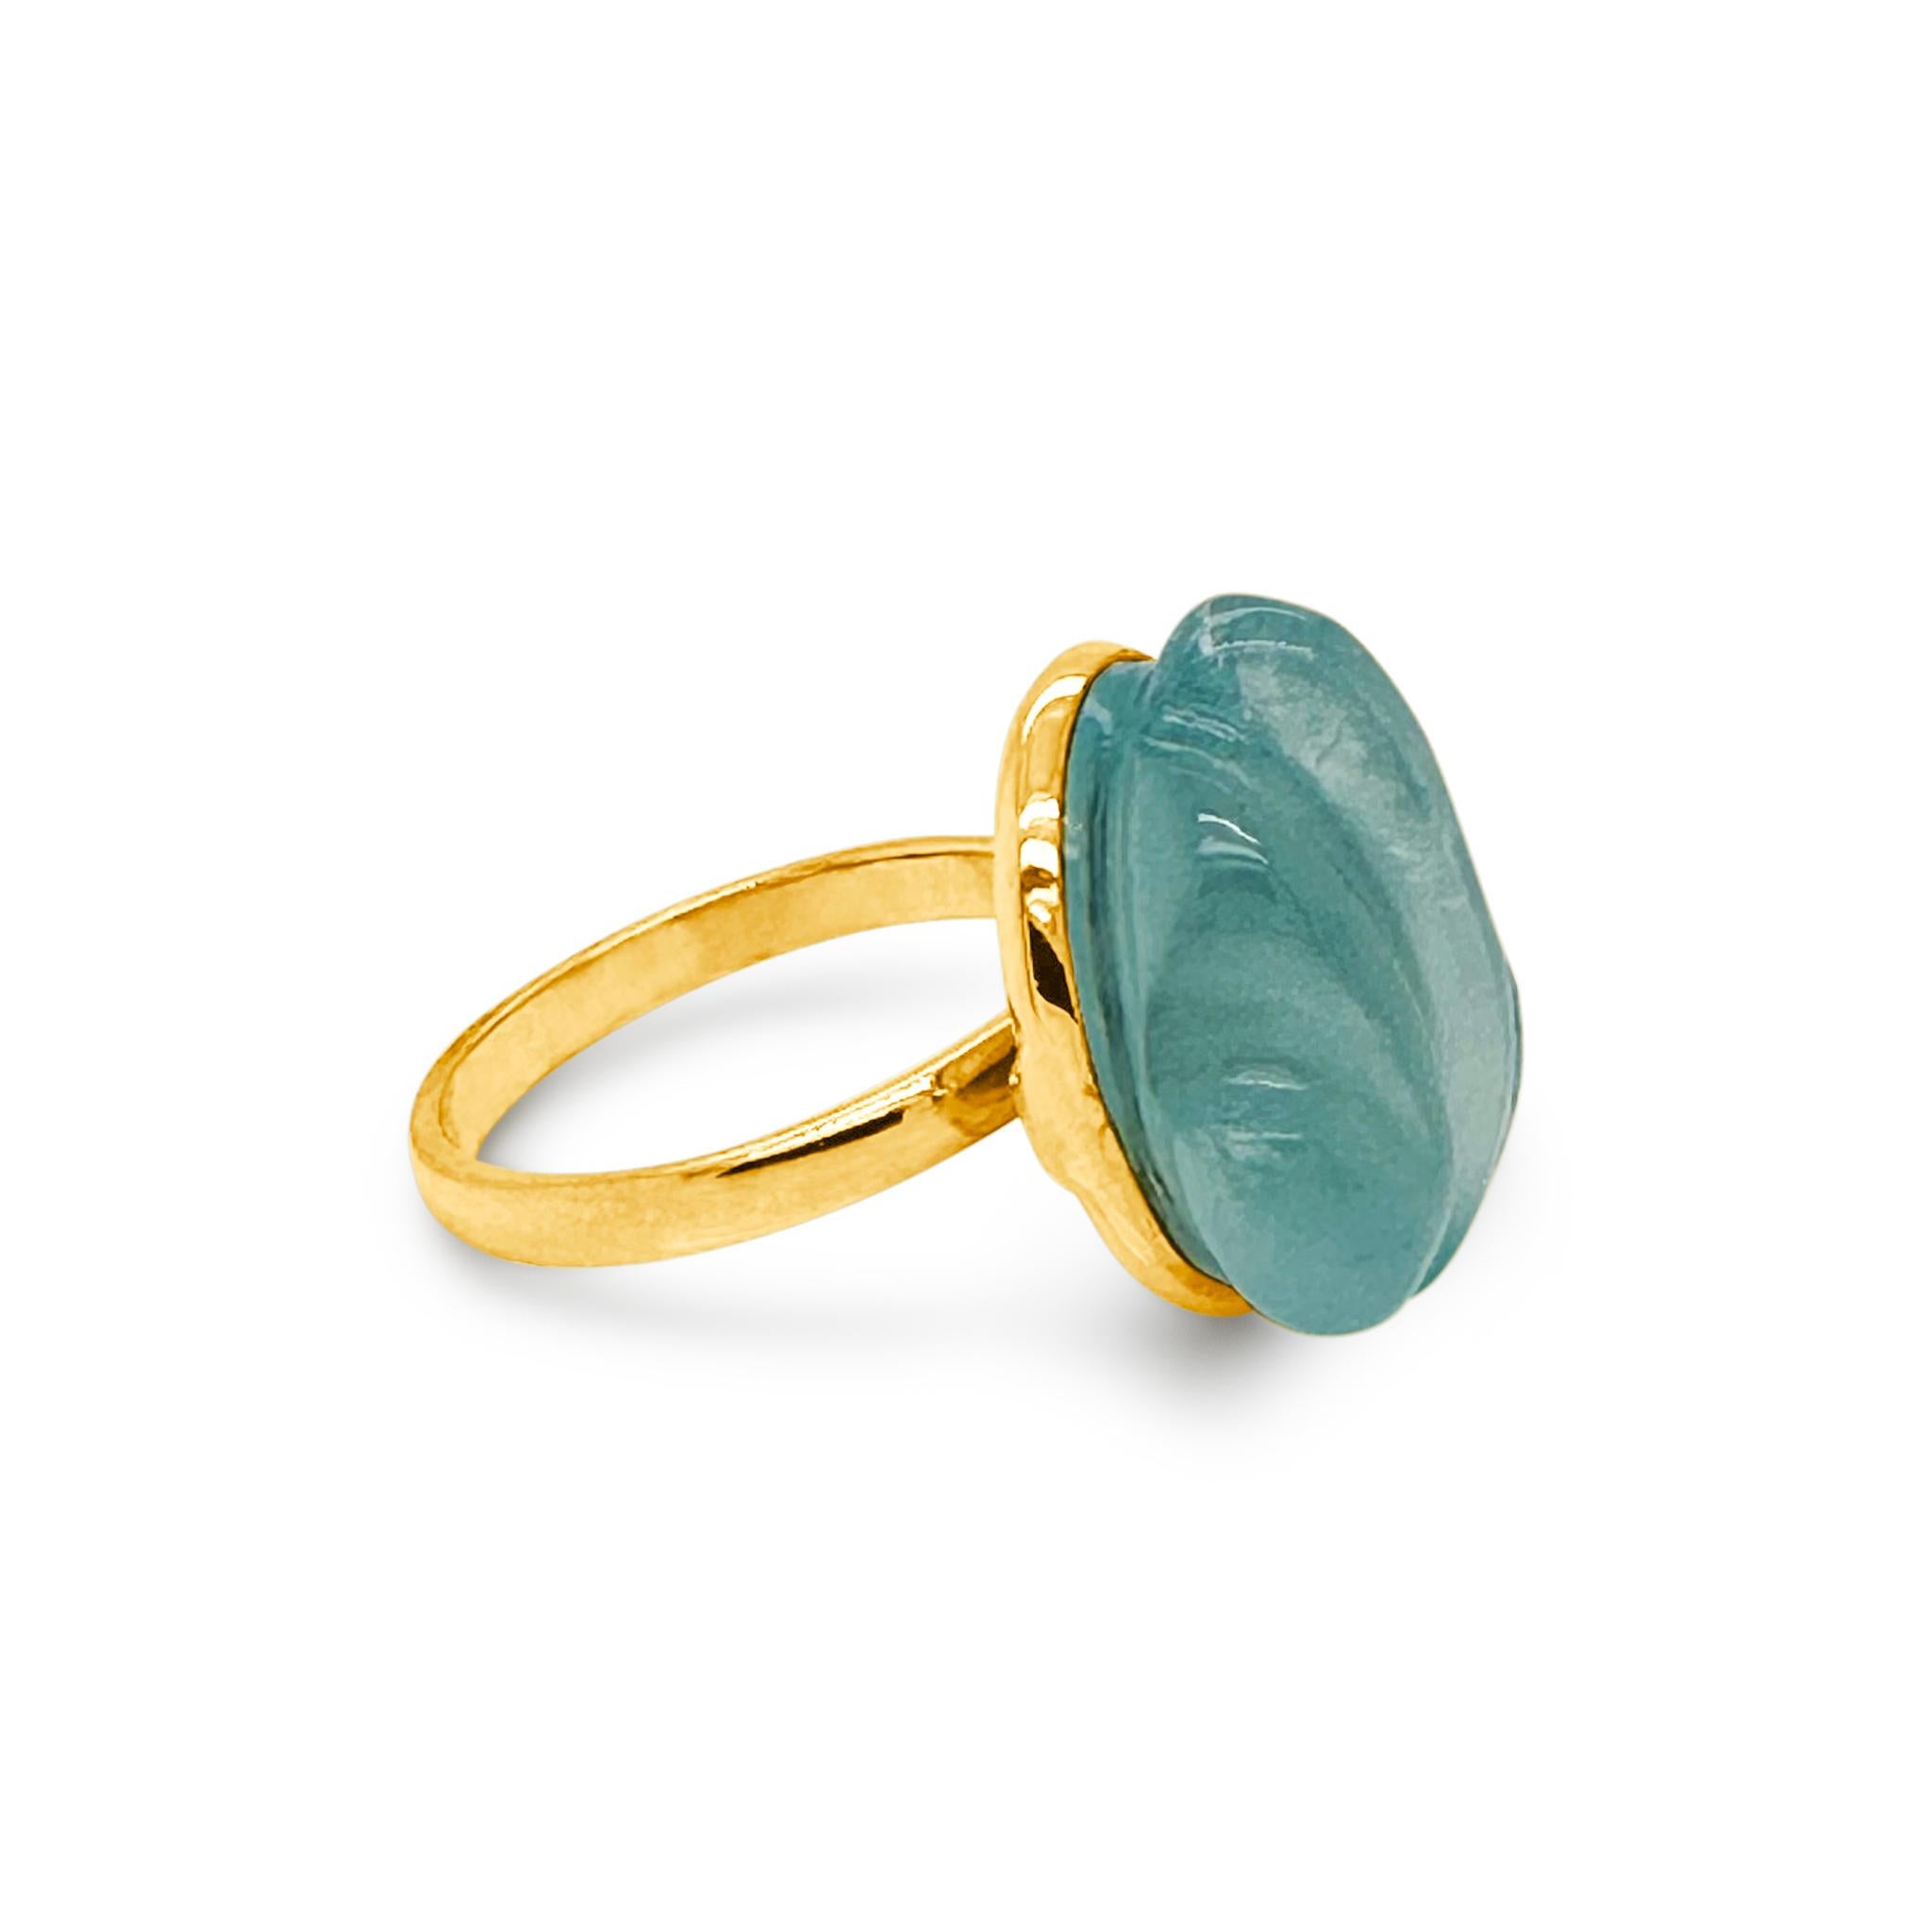 Antique Cushion Cut Aquamarine Carved Ring In 18K Yellow Gold For Sale